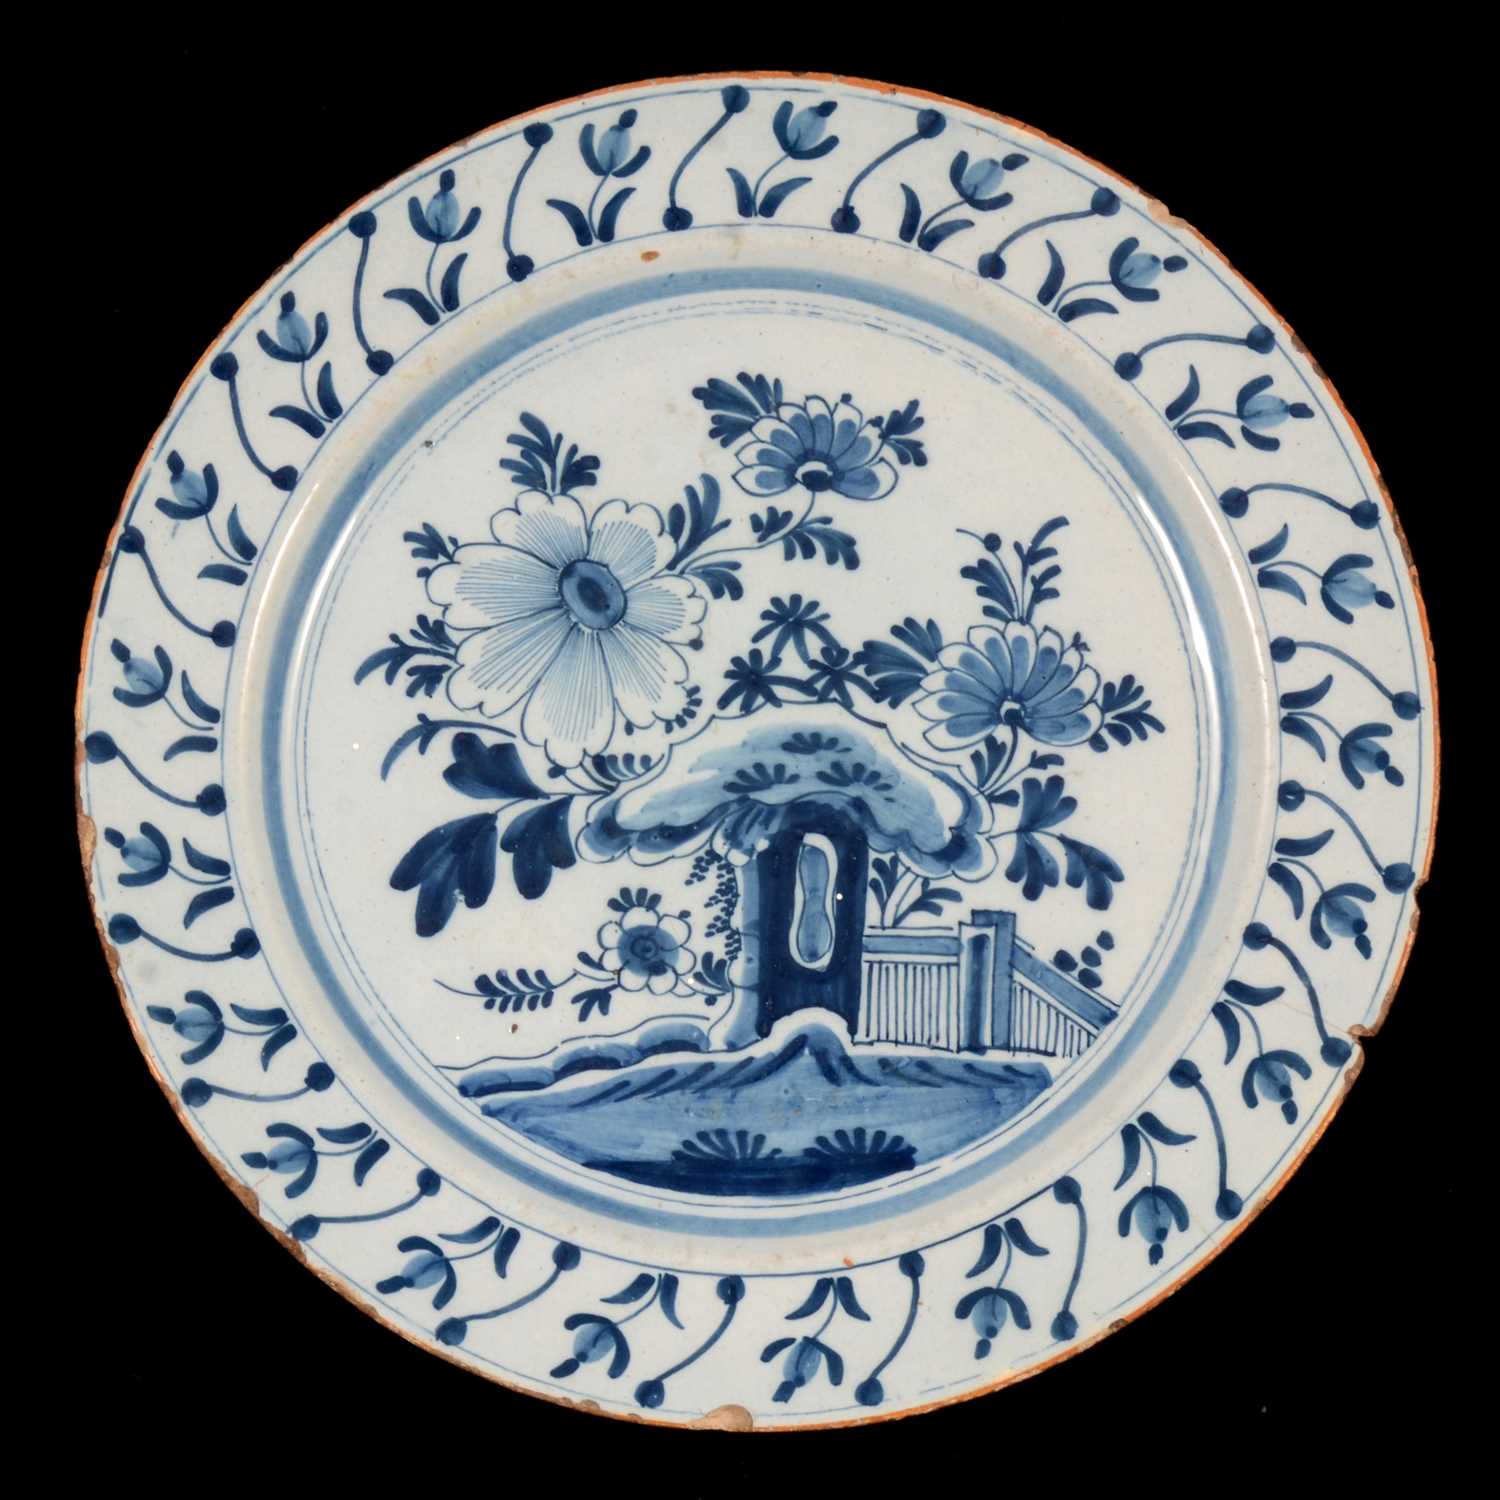 Lot 6 - An English delft blue and white charger